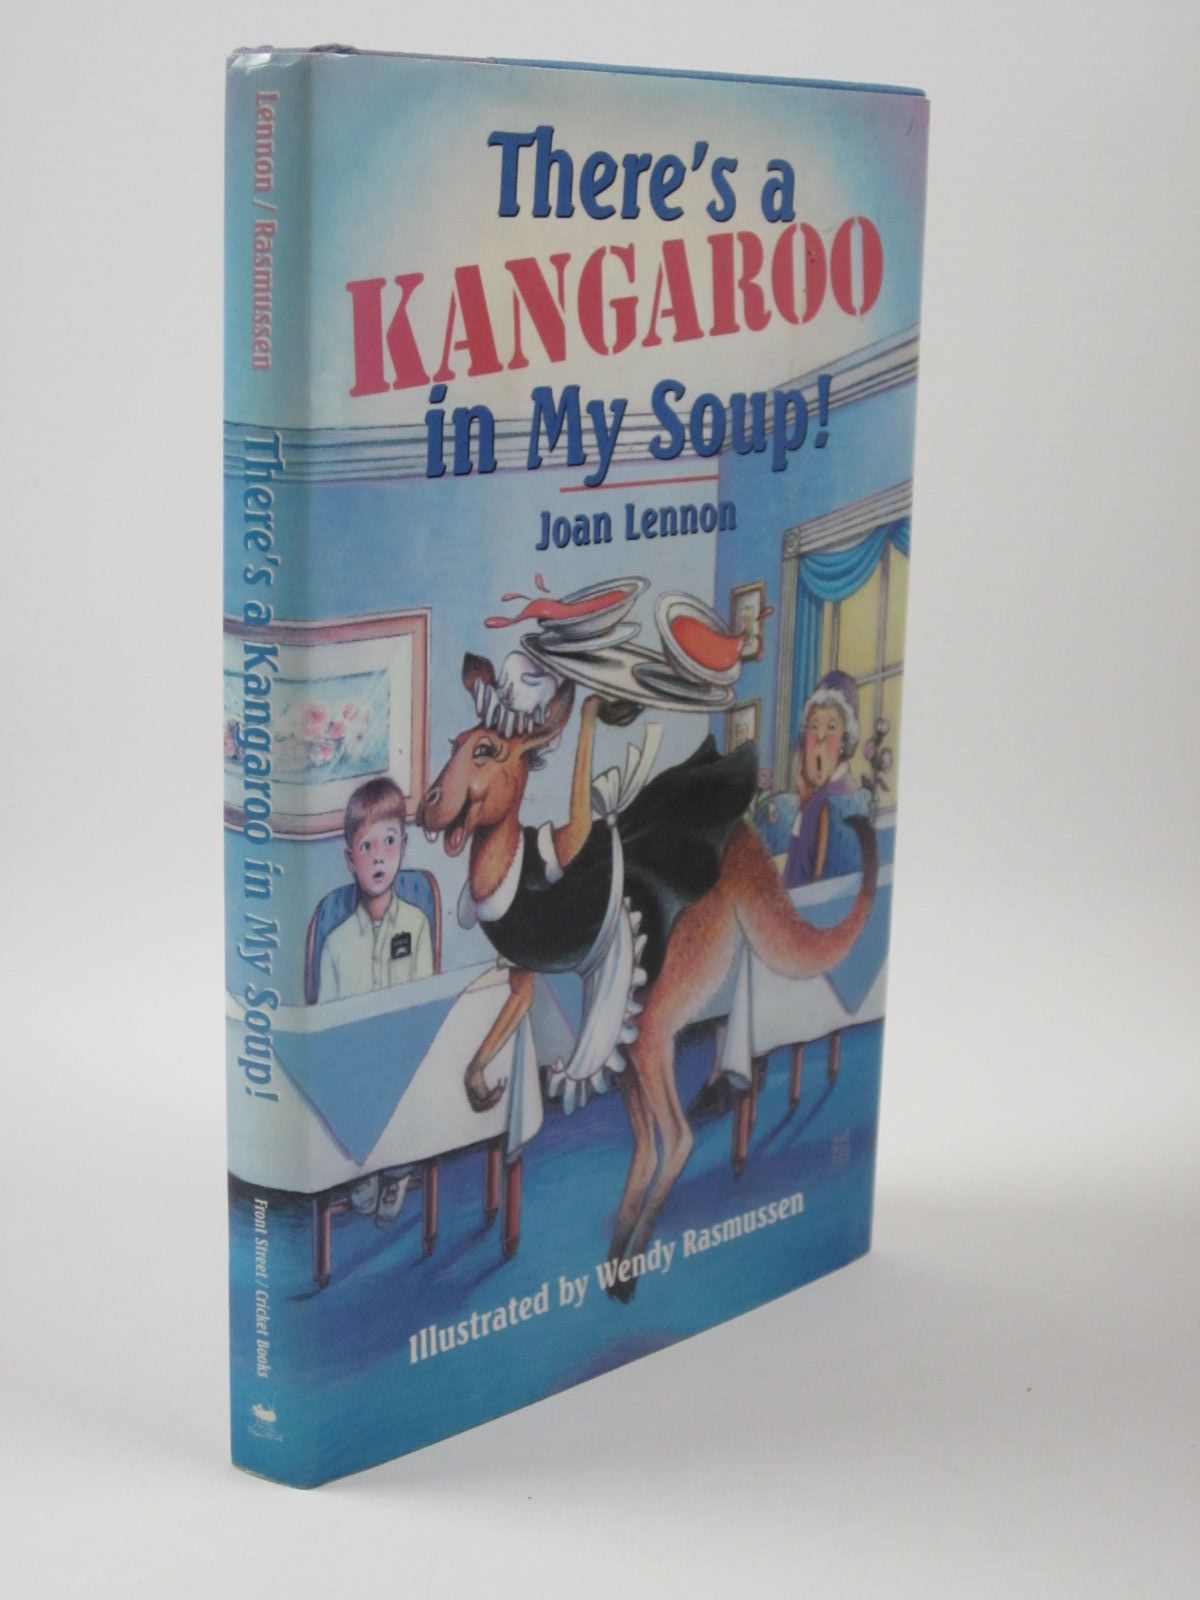 Photo of THERE'S A KANGAROO IN MY SOUP! written by Lennon, Joan illustrated by Rasmussen, Wendy published by Cricket Books (STOCK CODE: 1401554)  for sale by Stella & Rose's Books